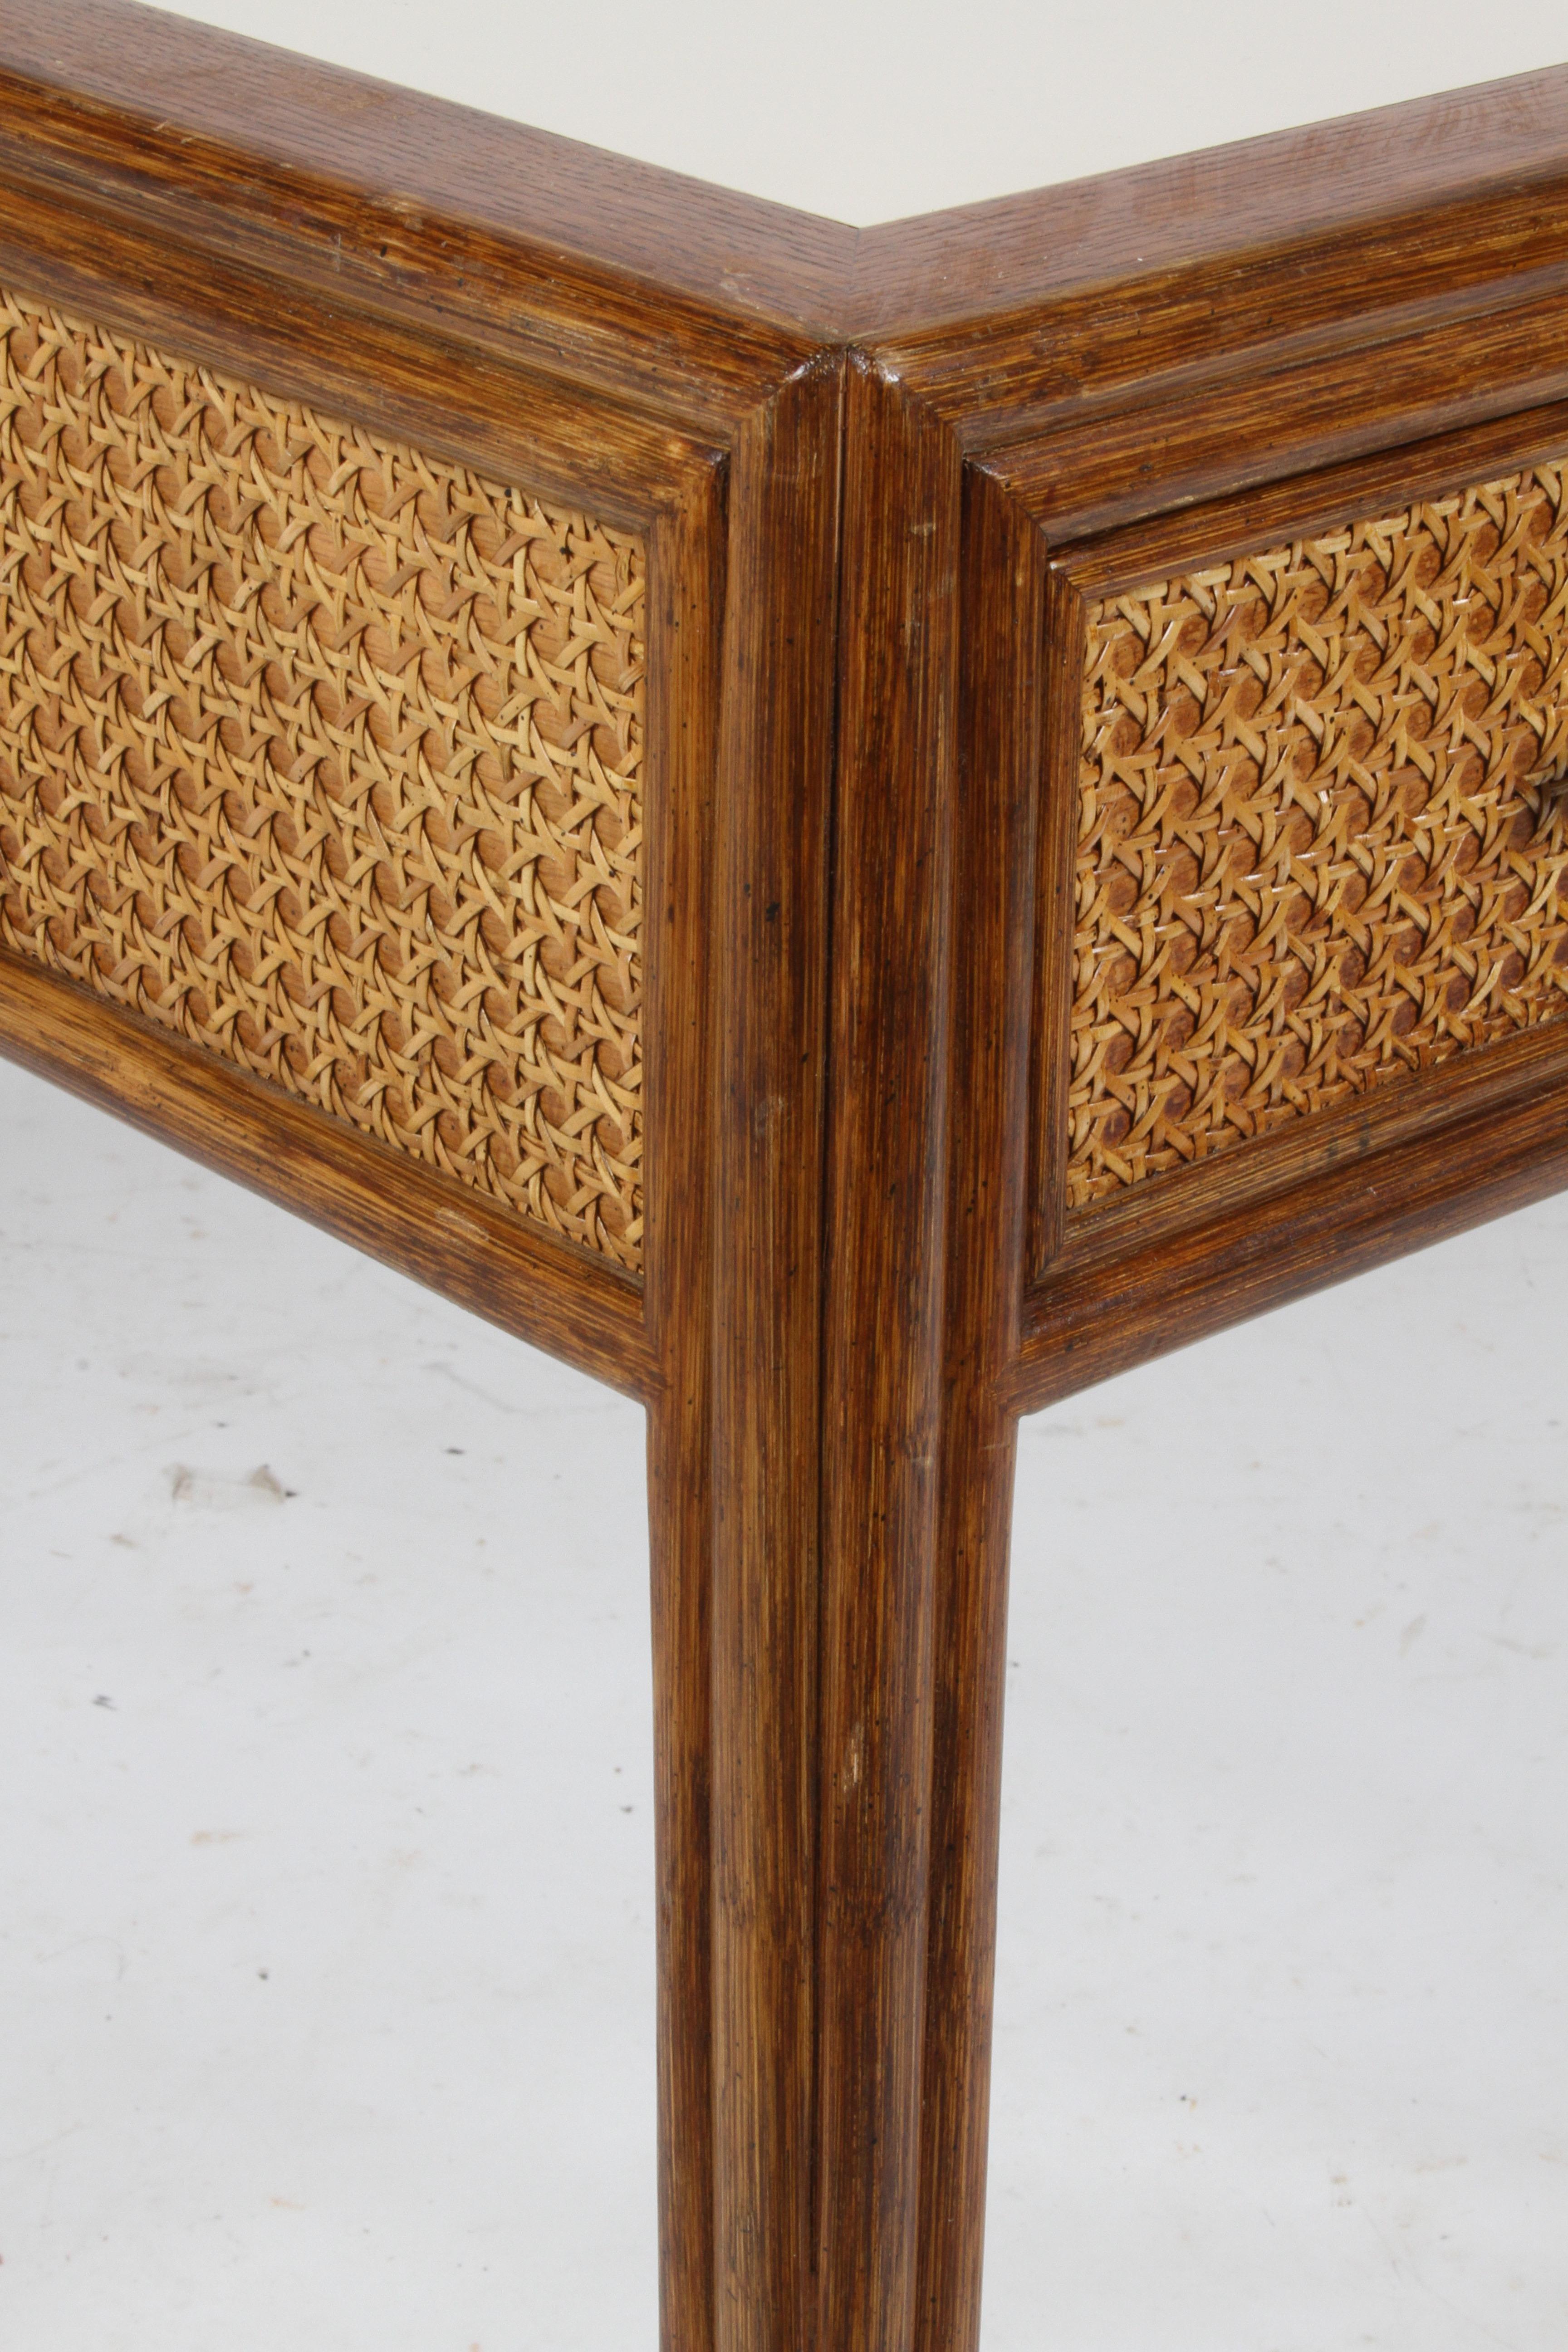 1970s McGuire Furniture Rattan and Caned Desk 1